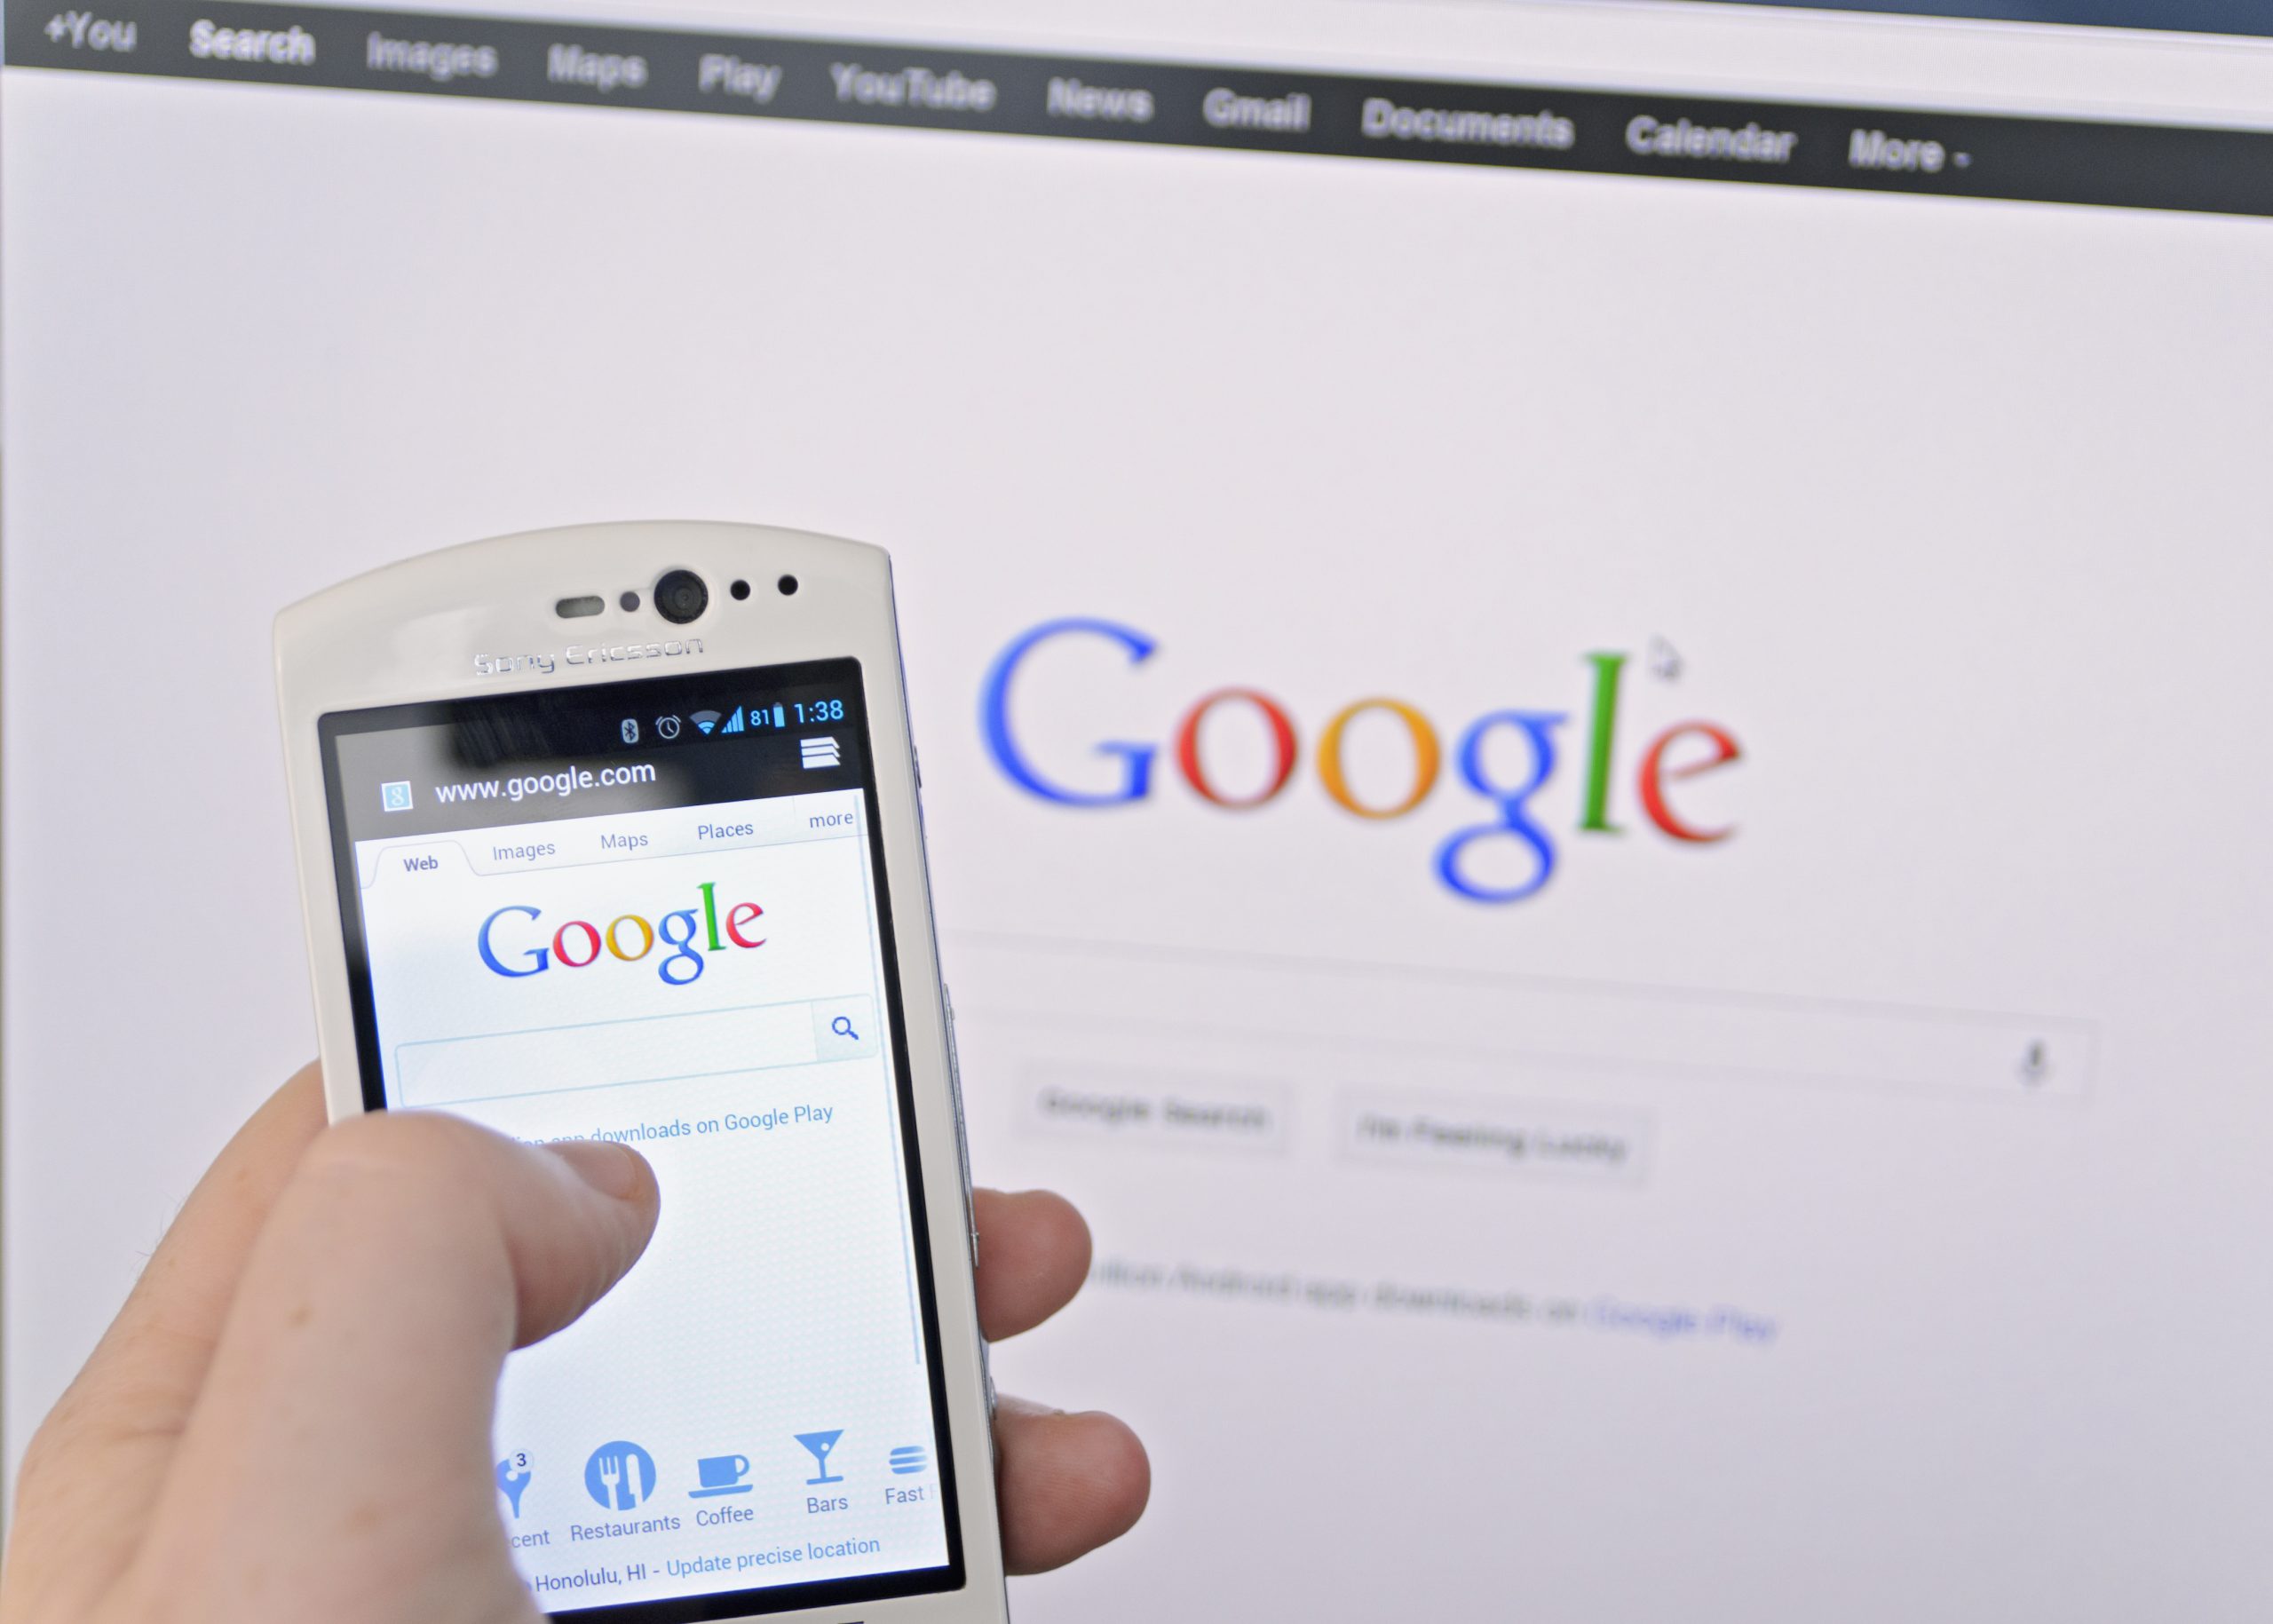 Image of a person on a smartphone conducting a Google search on a phone in front of a computer showing Google on screen.